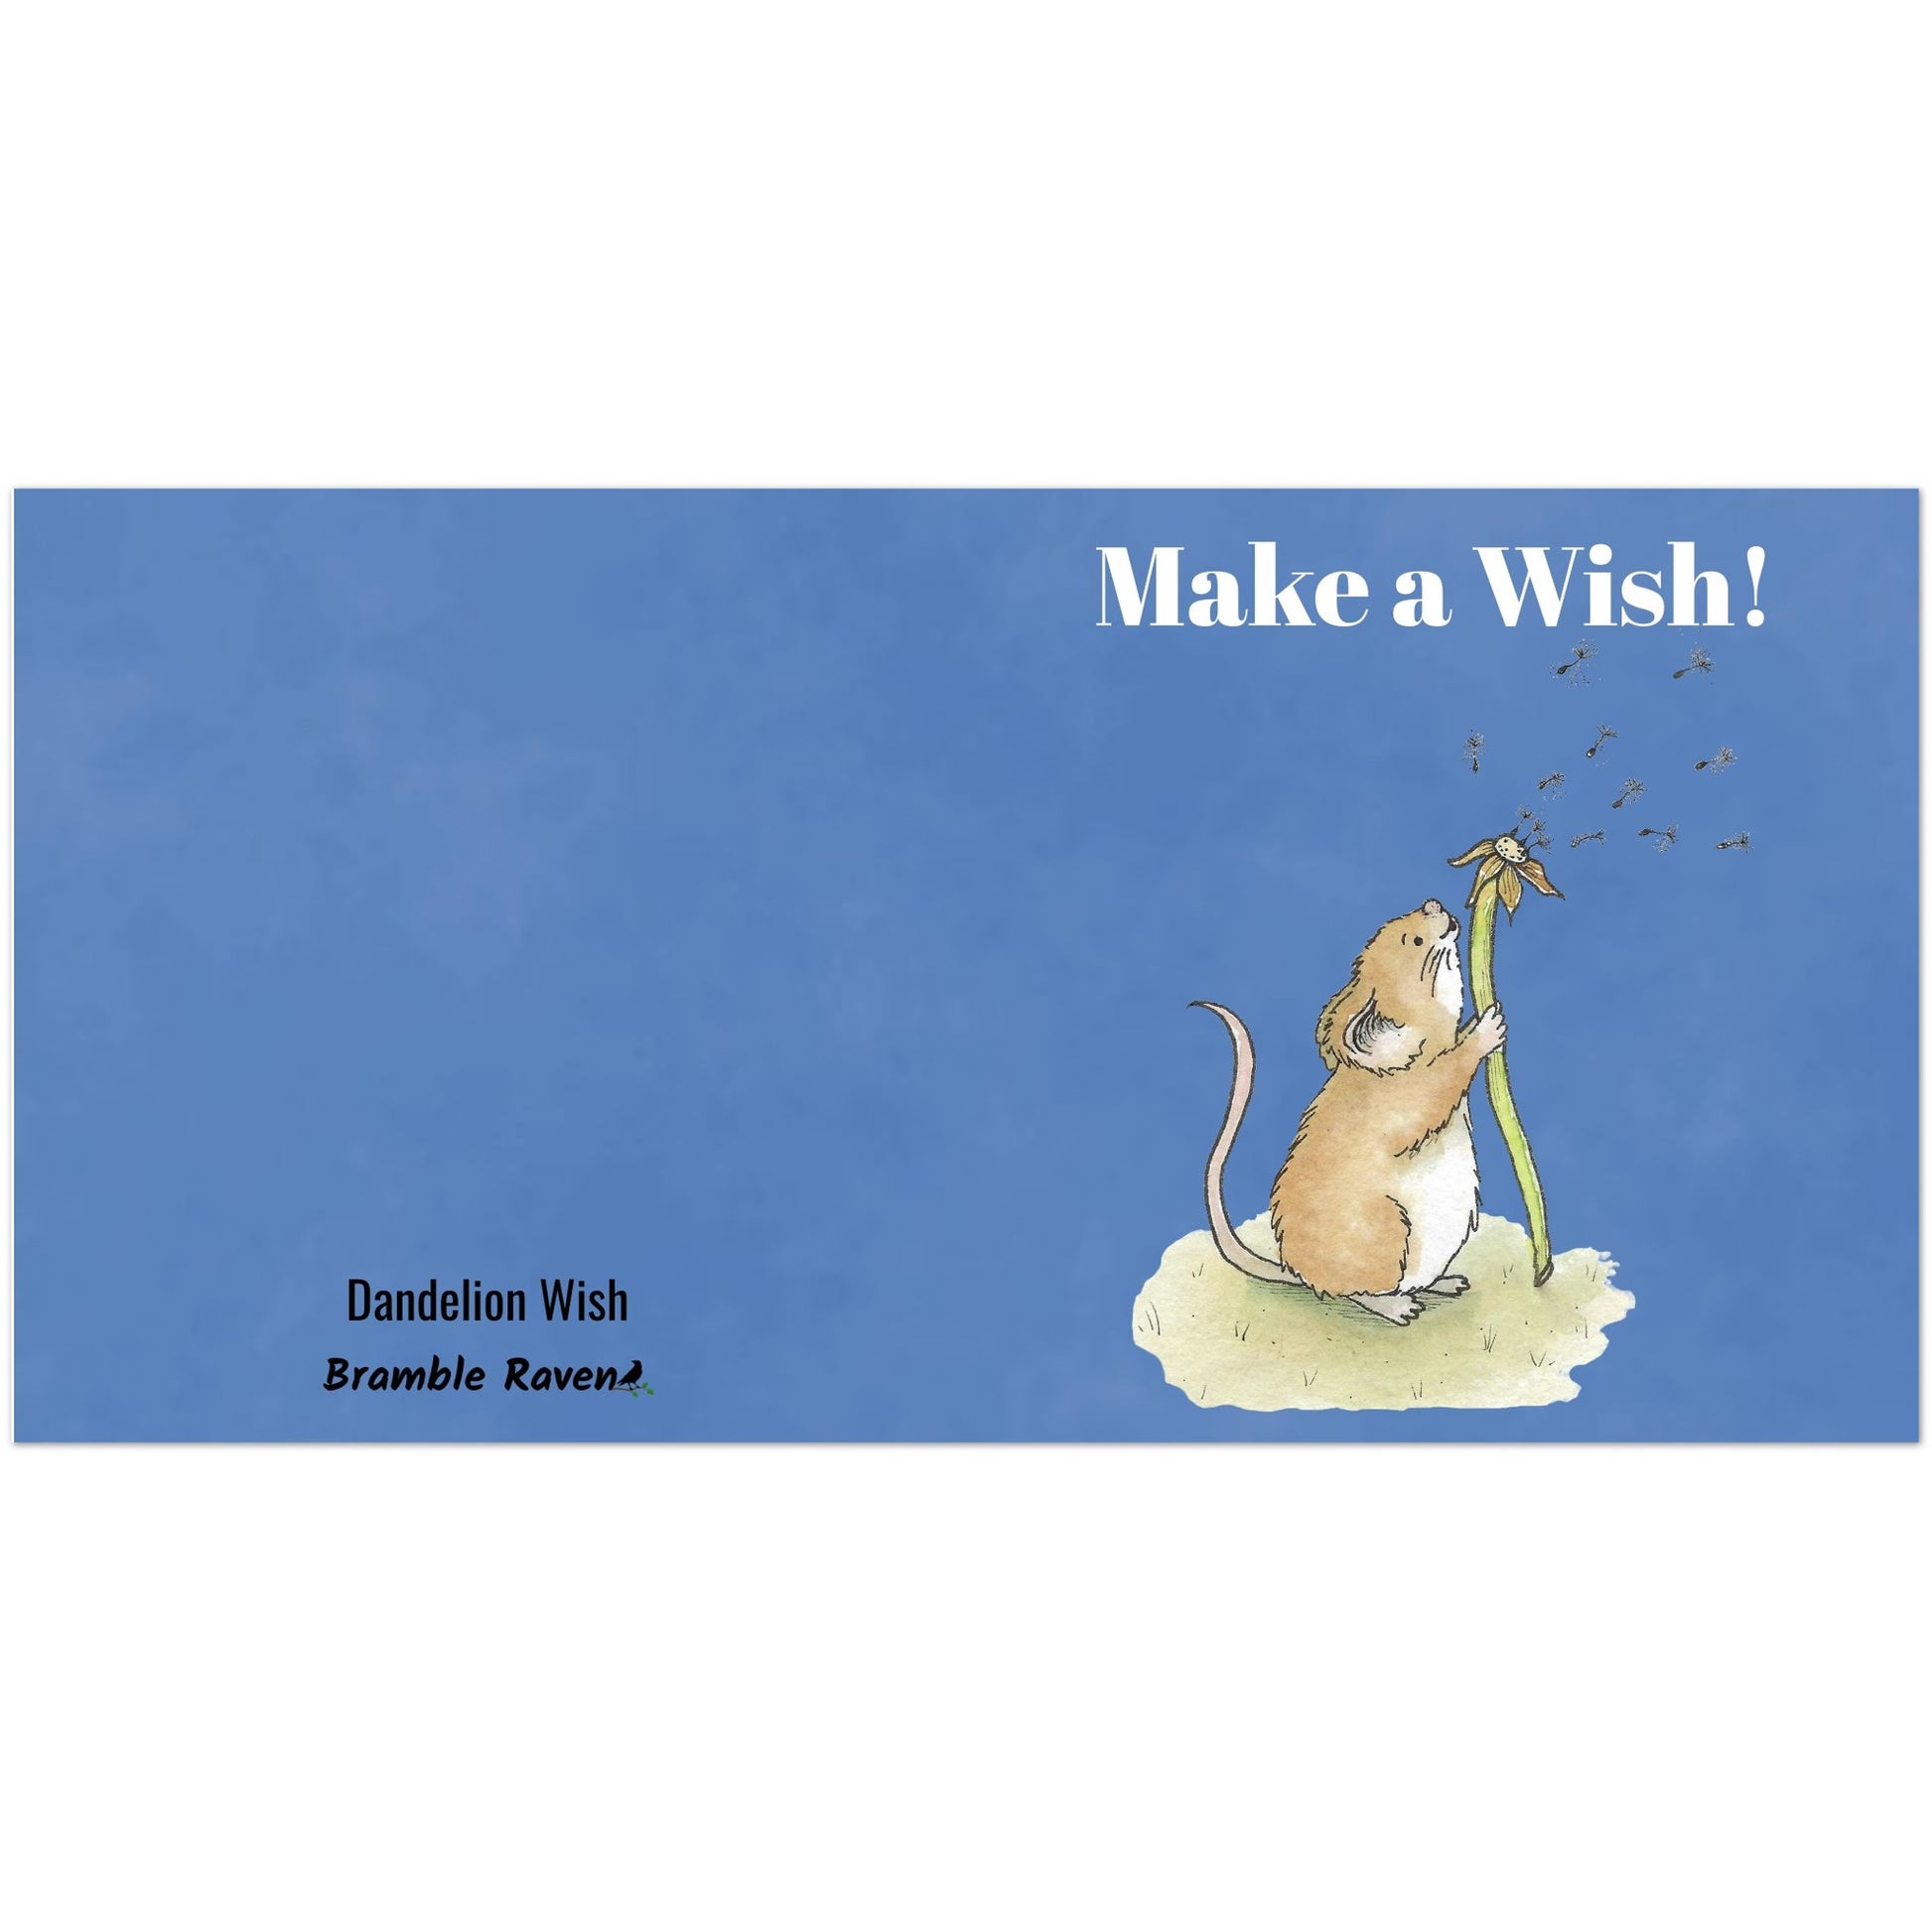 Ten fun greeting cards with envelopes. The front features white "Make a wish!" text and our watercolor dandelion wish mouse on a blue background. Inside is blank. Made with thick 350 gsm 150lb coated paperboard with vibrant printing.  Cards measure 5.25 by 5.25 inches.